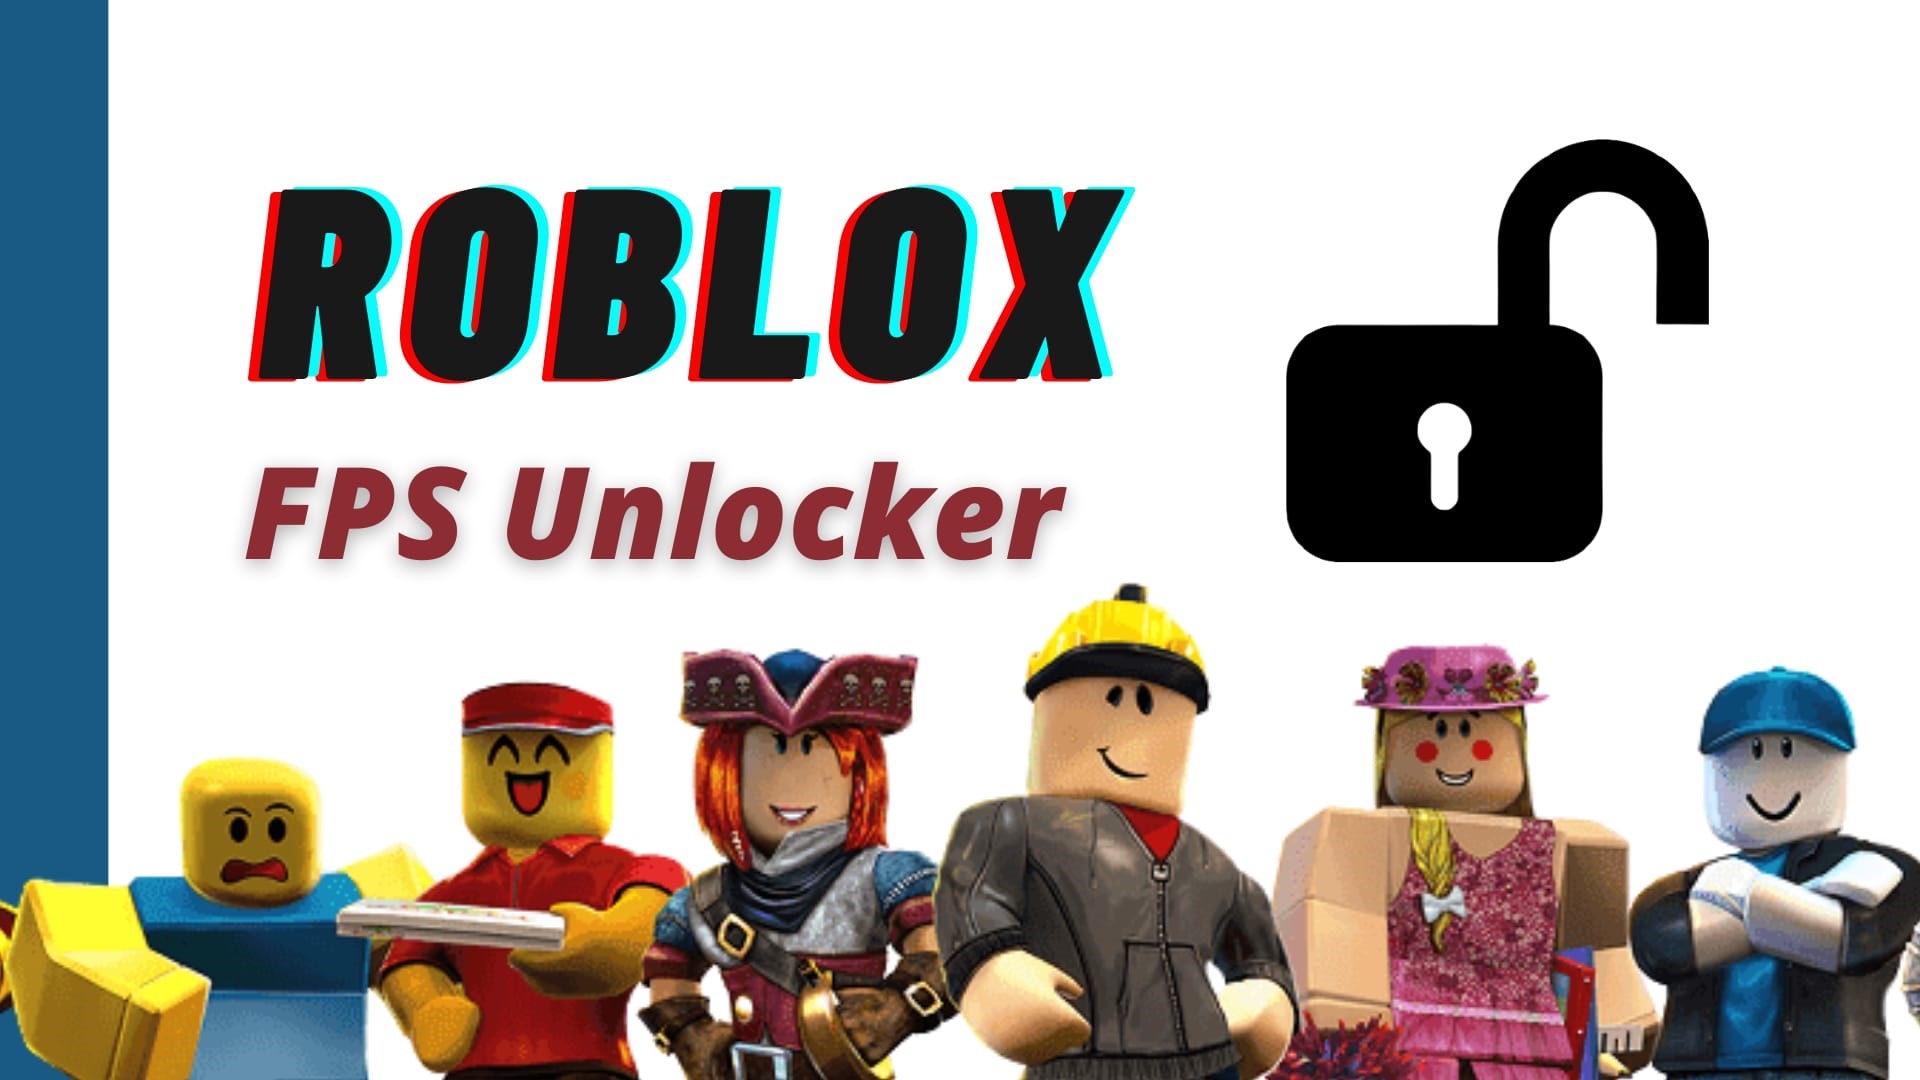 Roblox FPS Unlocker Boost Up Your Roblox Game